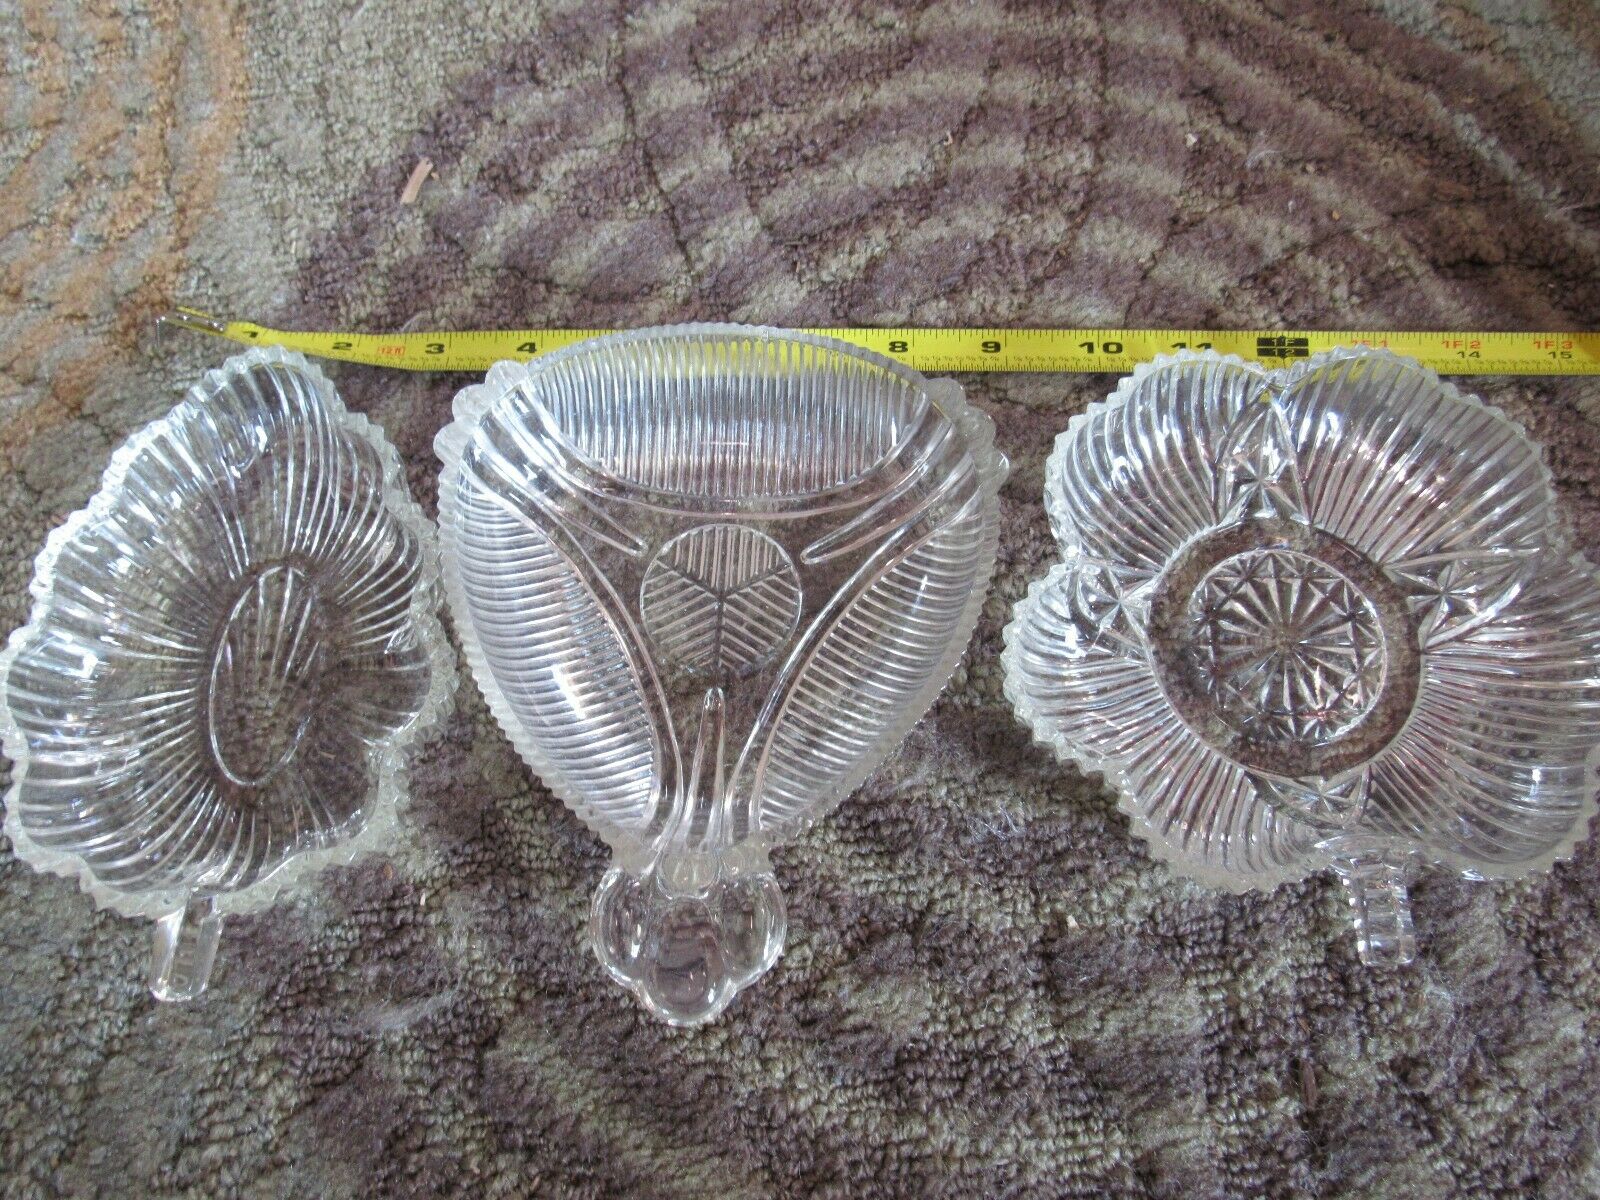 Old Vintage Antique Small Candy Dishes Lot Of 3 Glassware Serving Bowl